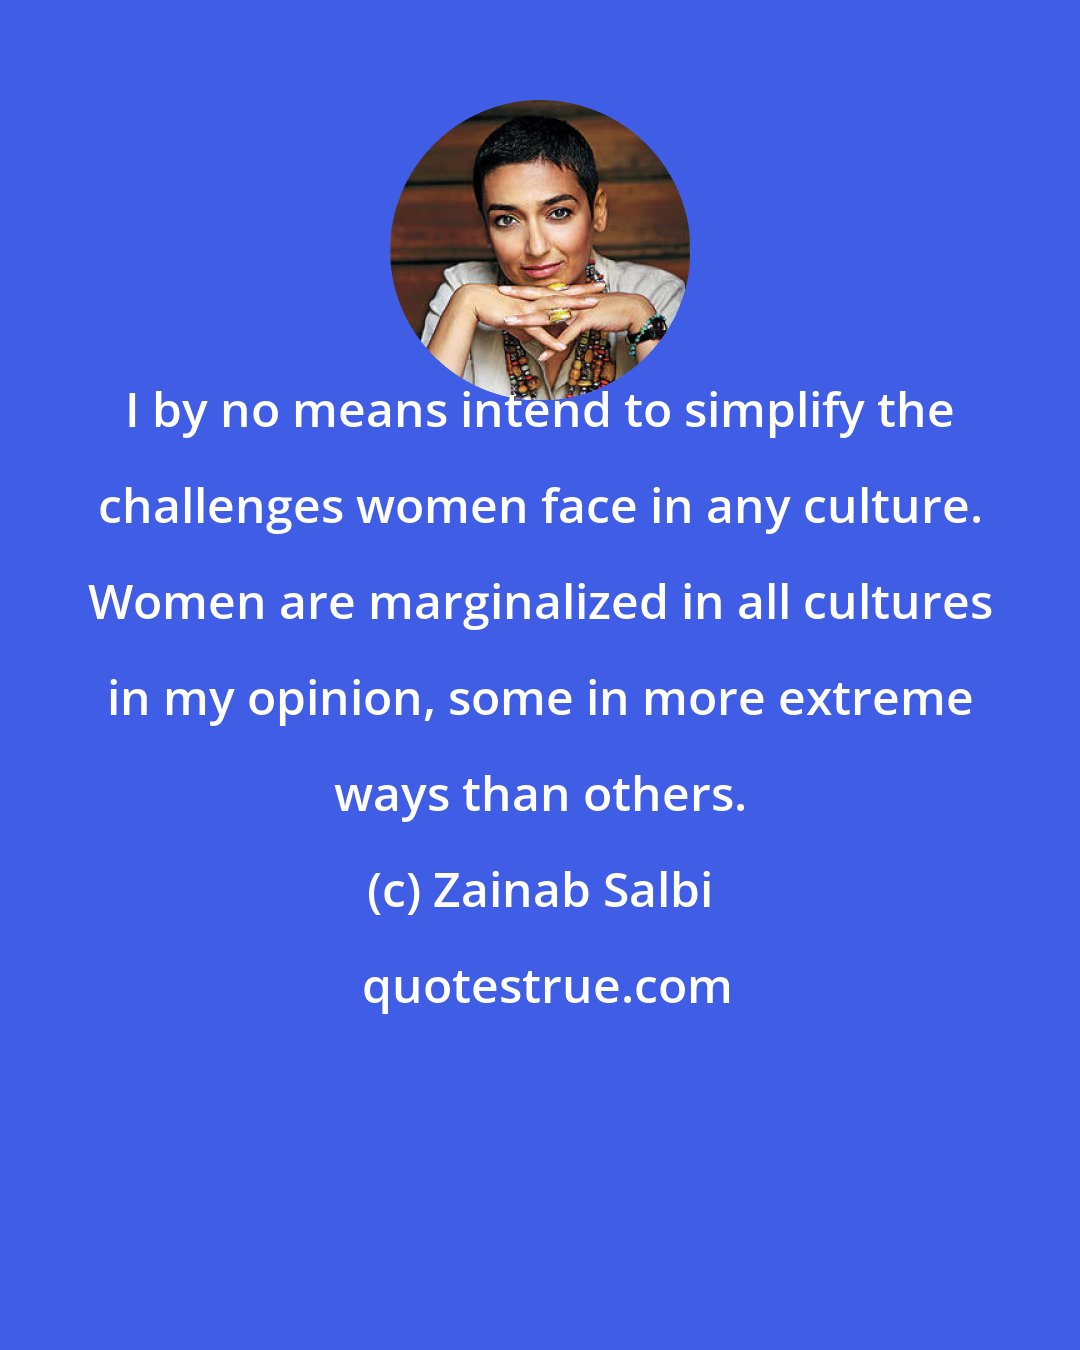 Zainab Salbi: I by no means intend to simplify the challenges women face in any culture. Women are marginalized in all cultures in my opinion, some in more extreme ways than others.